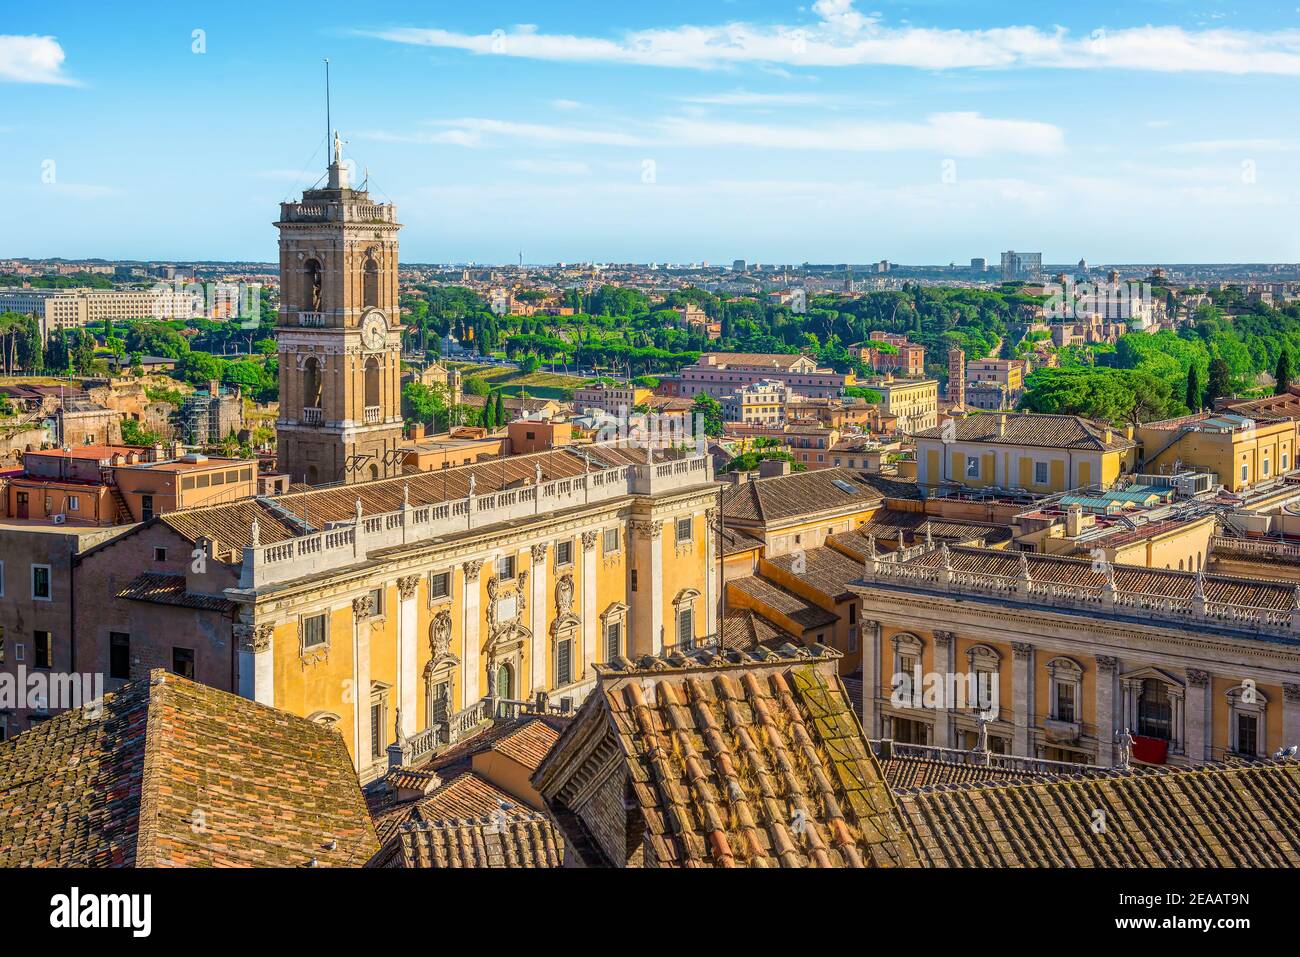 Palace of the Senators view from Vittoriano on Capitoline Hill. Rome, Italy Stock Photo